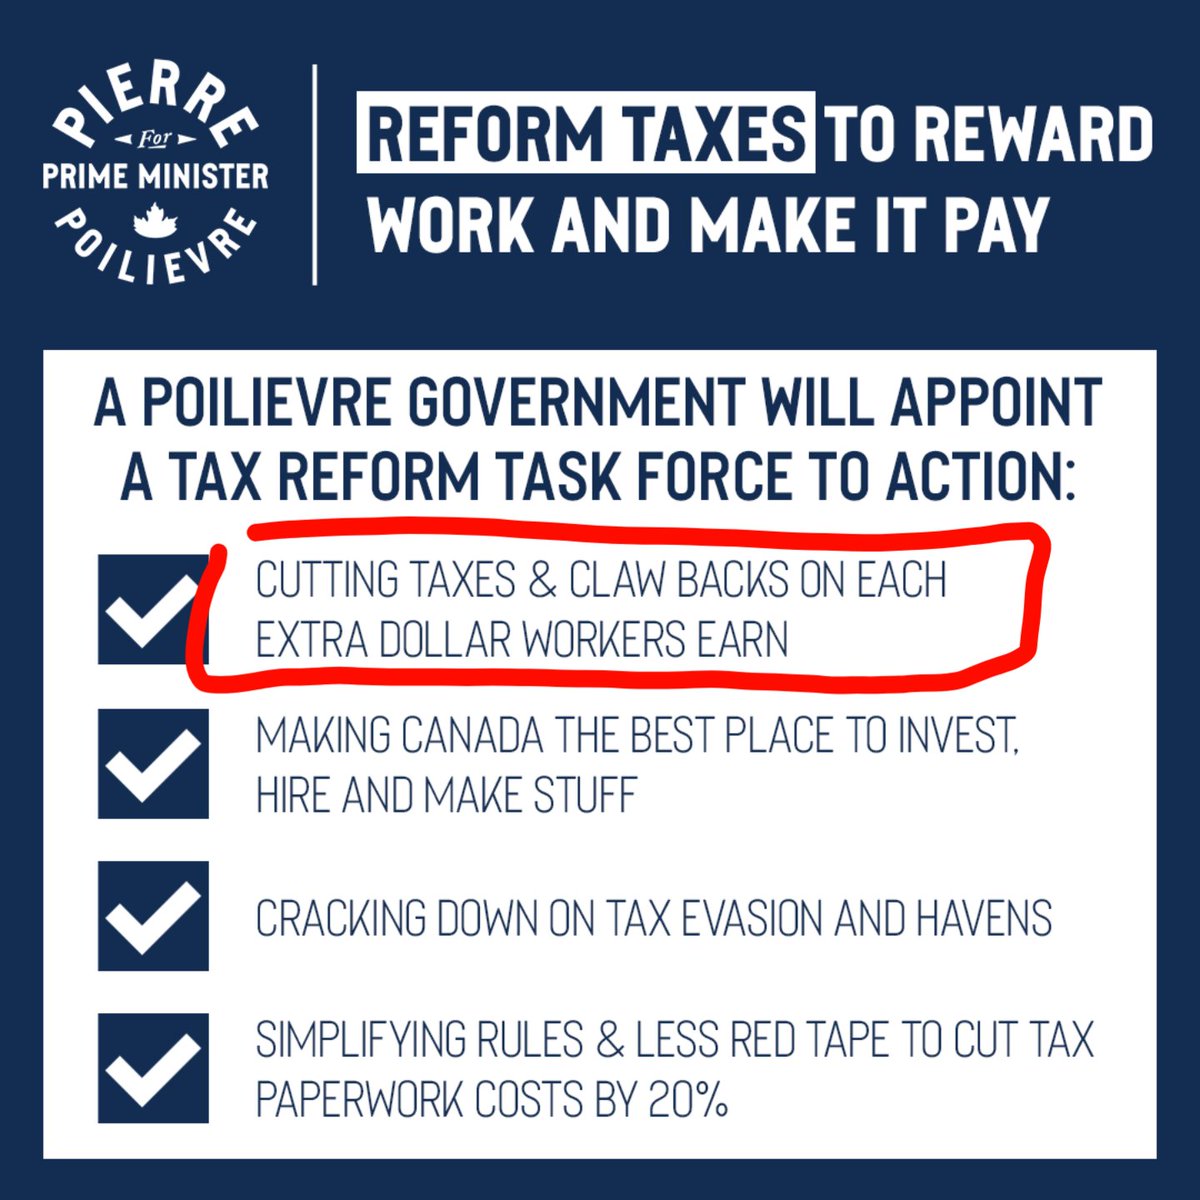 Pierre Poilievre told Brian Lilley he'll cut 'income taxes'. He has said it before but he considers EI & CPP 'taxes' A normal candidate says things like 'change tax brackets' but HE WON'T CLARIFY which taxes 🤔 He's after Canadians' retirement in Danielle Smith fashion #cdnpoli